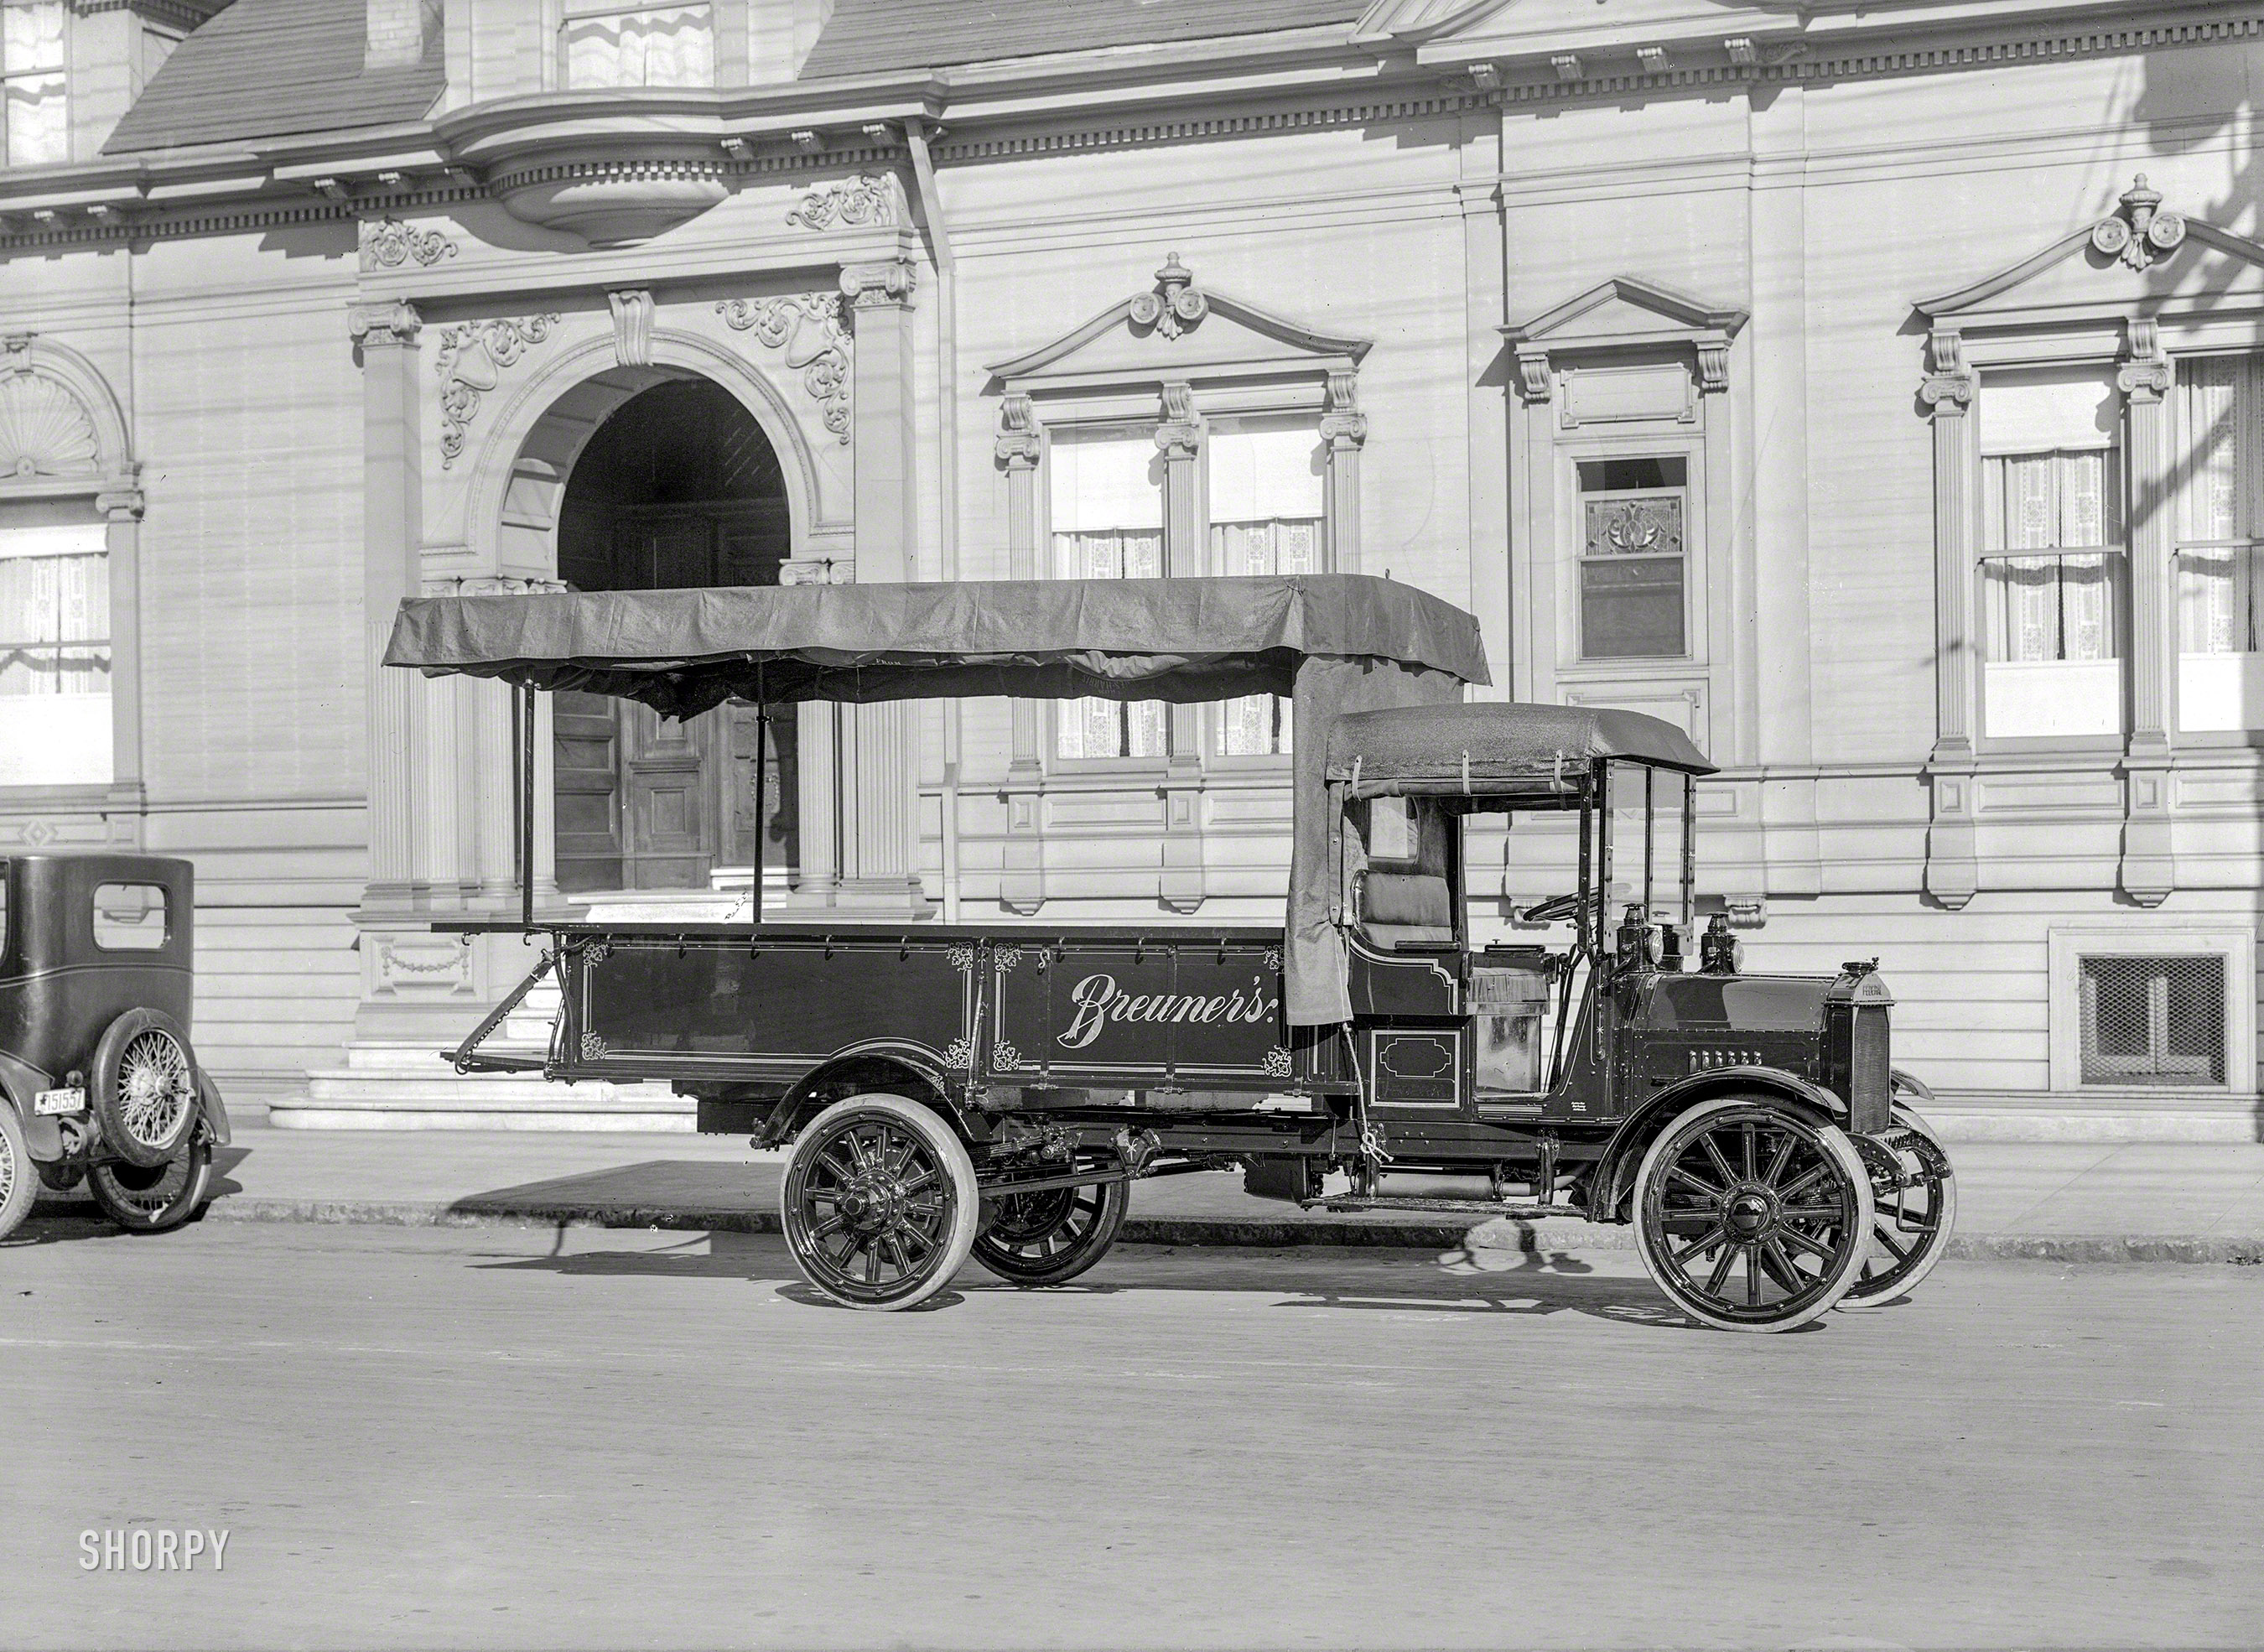 San Francisco, 1919. "Federal truck -- Breuner's van." Delivering the goods for a furniture retailer that got its start in the California Gold Rush, declared bankruptcy in 2004 and reconstituted itself as an online business. View full size.